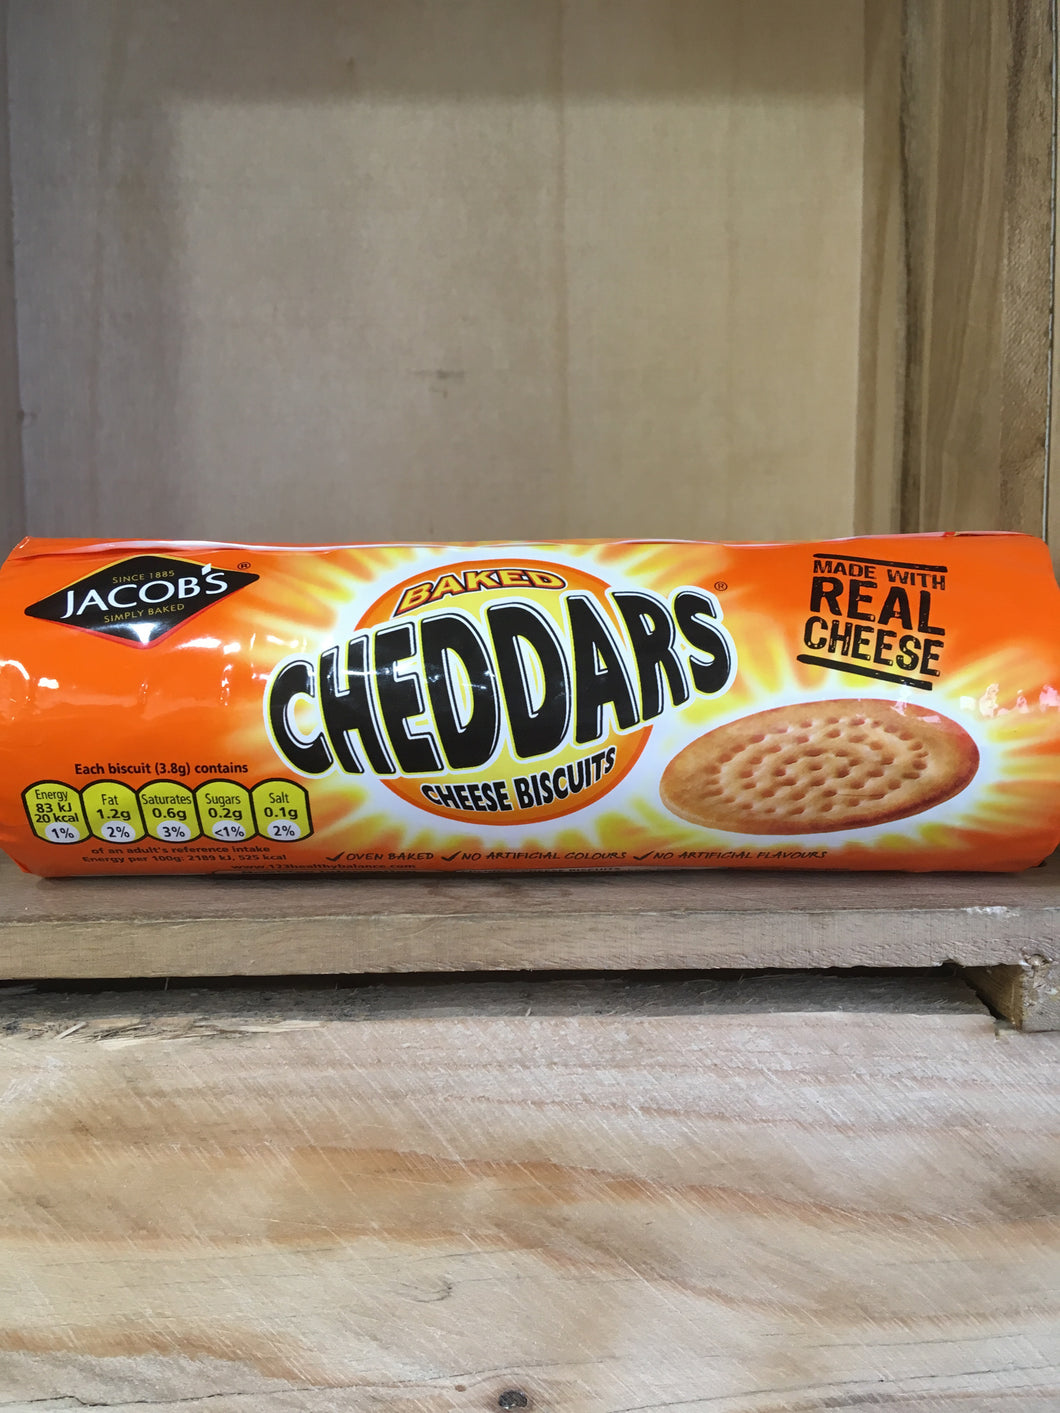 Jacobs Cheddars Original Cheese Biscuits 150g